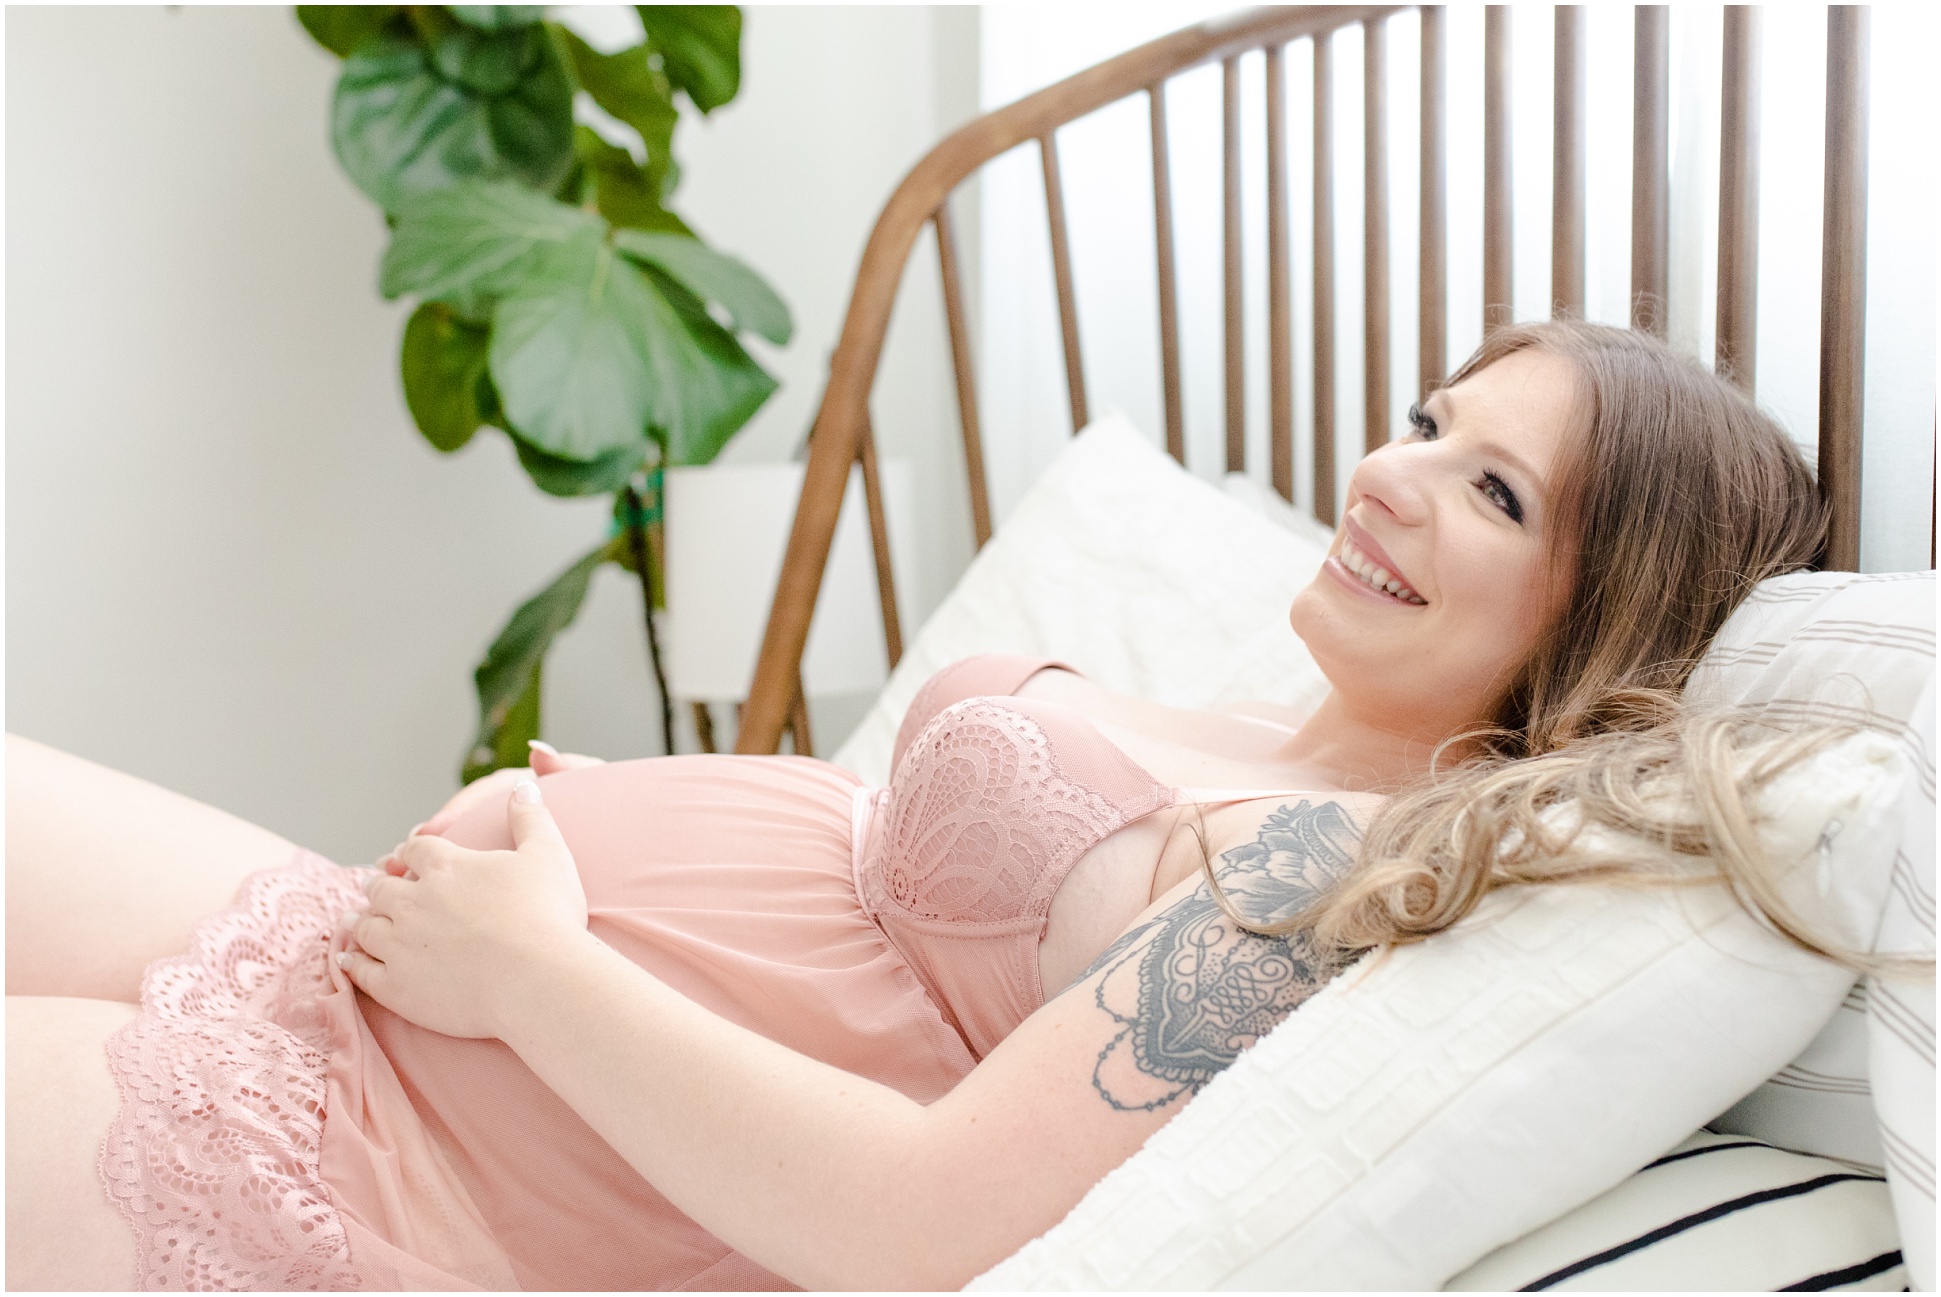 Mom-To-Be Relaxing Waiting for Her Baby To ARrive